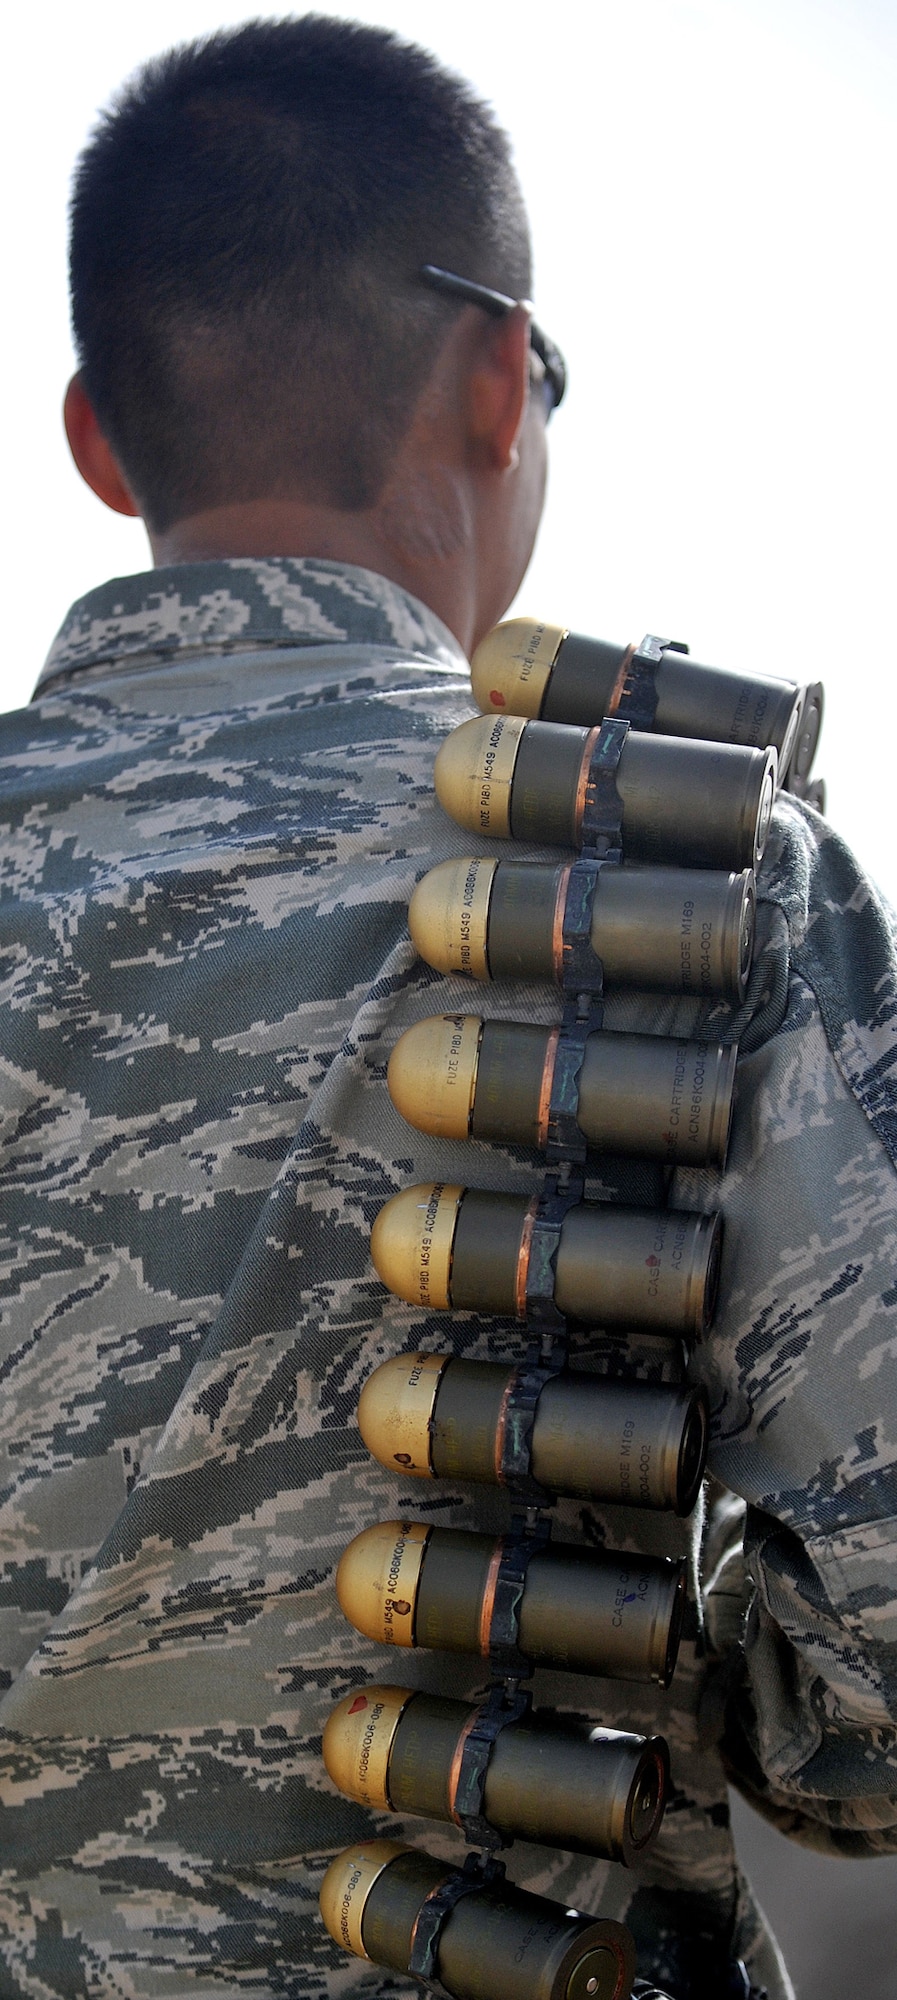 Senior Airman Jesse Mercado carries a link of 40-millimeter rounds on his shoulder to add to the pile of ammunition for detonation March 3, 2011, at Ali Air Base, Iraq. Airman Mercado is an explosive ordnance disposal technician assigned to the 407th Expeditionary Operations Support Squadron. (U.S. Air Force photo/Senior Airman Andrew Lee) 